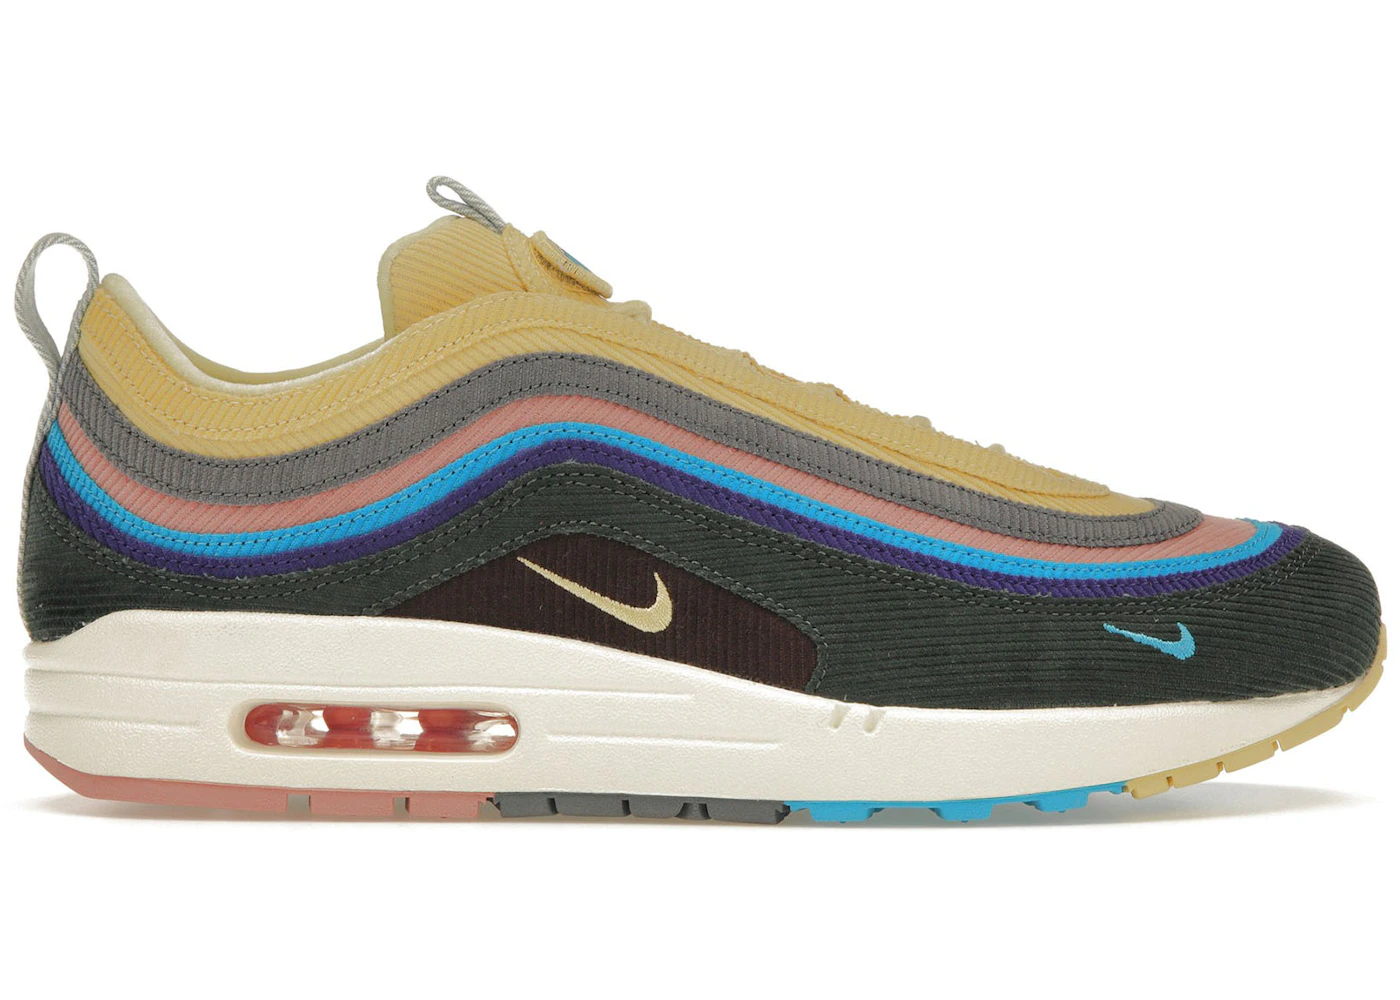 Nike Air Max 1/97 Sean Wotherspoon (Extra Lace Set Only) - AJ4219-400 -